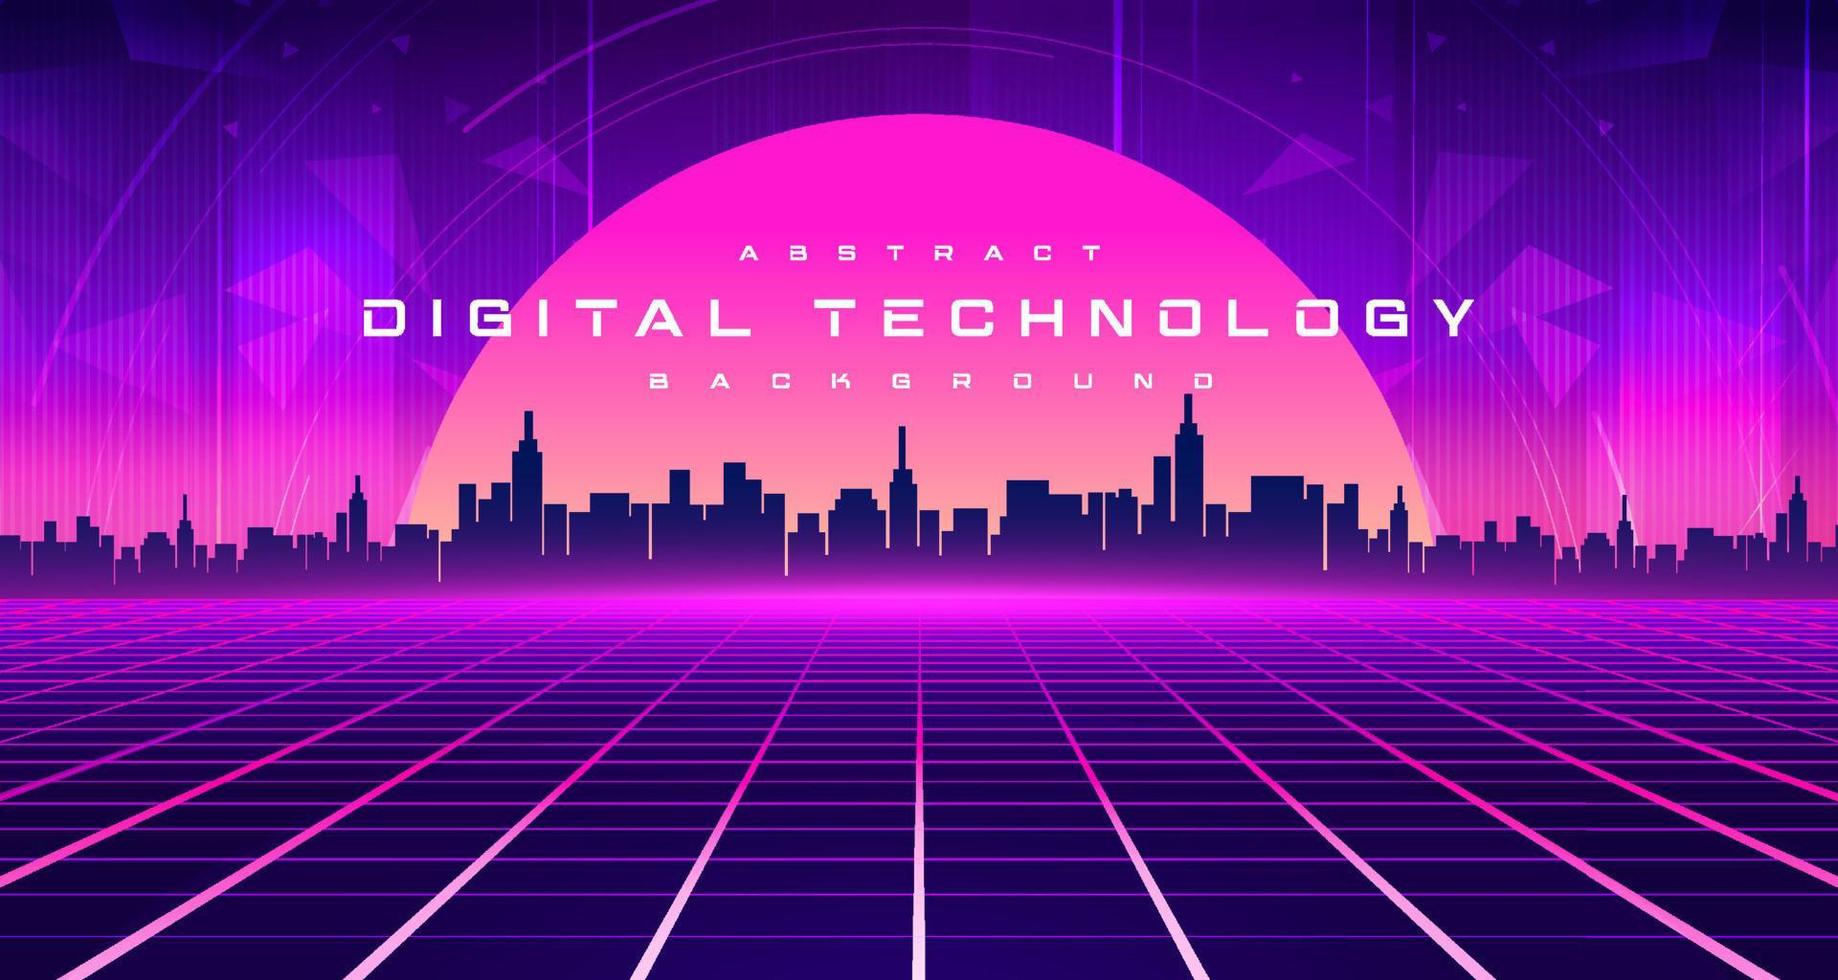 Digital technology metaverse neon blue pink purple background, cyber information, abstract speed connect communication, retro future meta tech, internet network connection, Ai big data illustration 3d vector